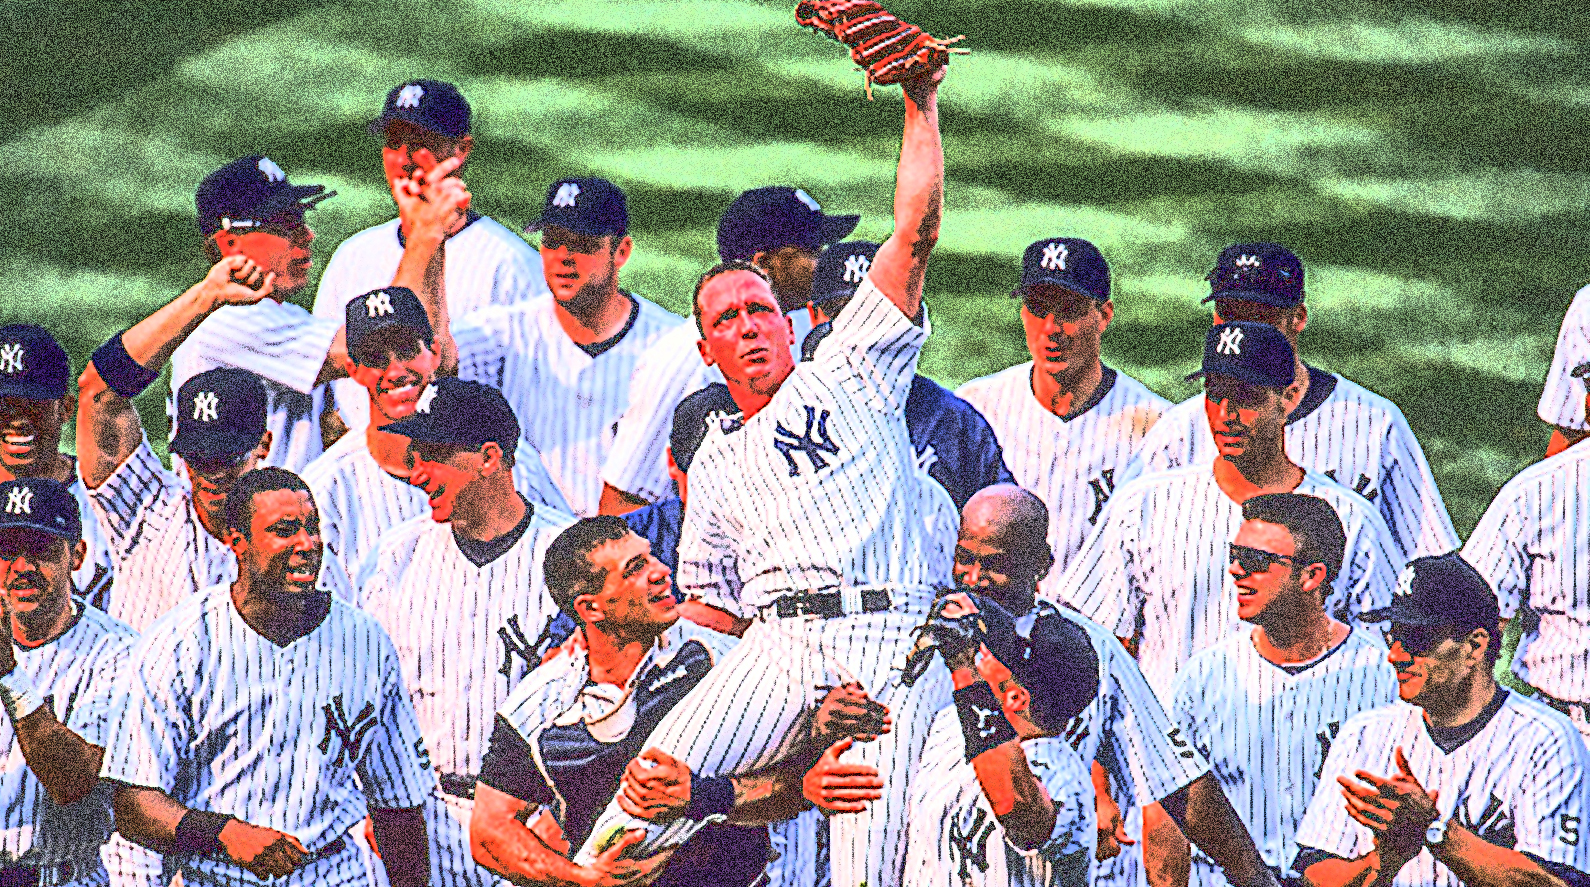 18 Jul 1999: Pitcher David Cone #36 of the New York Yankees is being carried by his teammates after the game against the Montreal Expos at the Yankee Stadium in the Bronx, New York. David Cone pitched a perfect game to allow the Yankees to defeat the Expos 6-0.